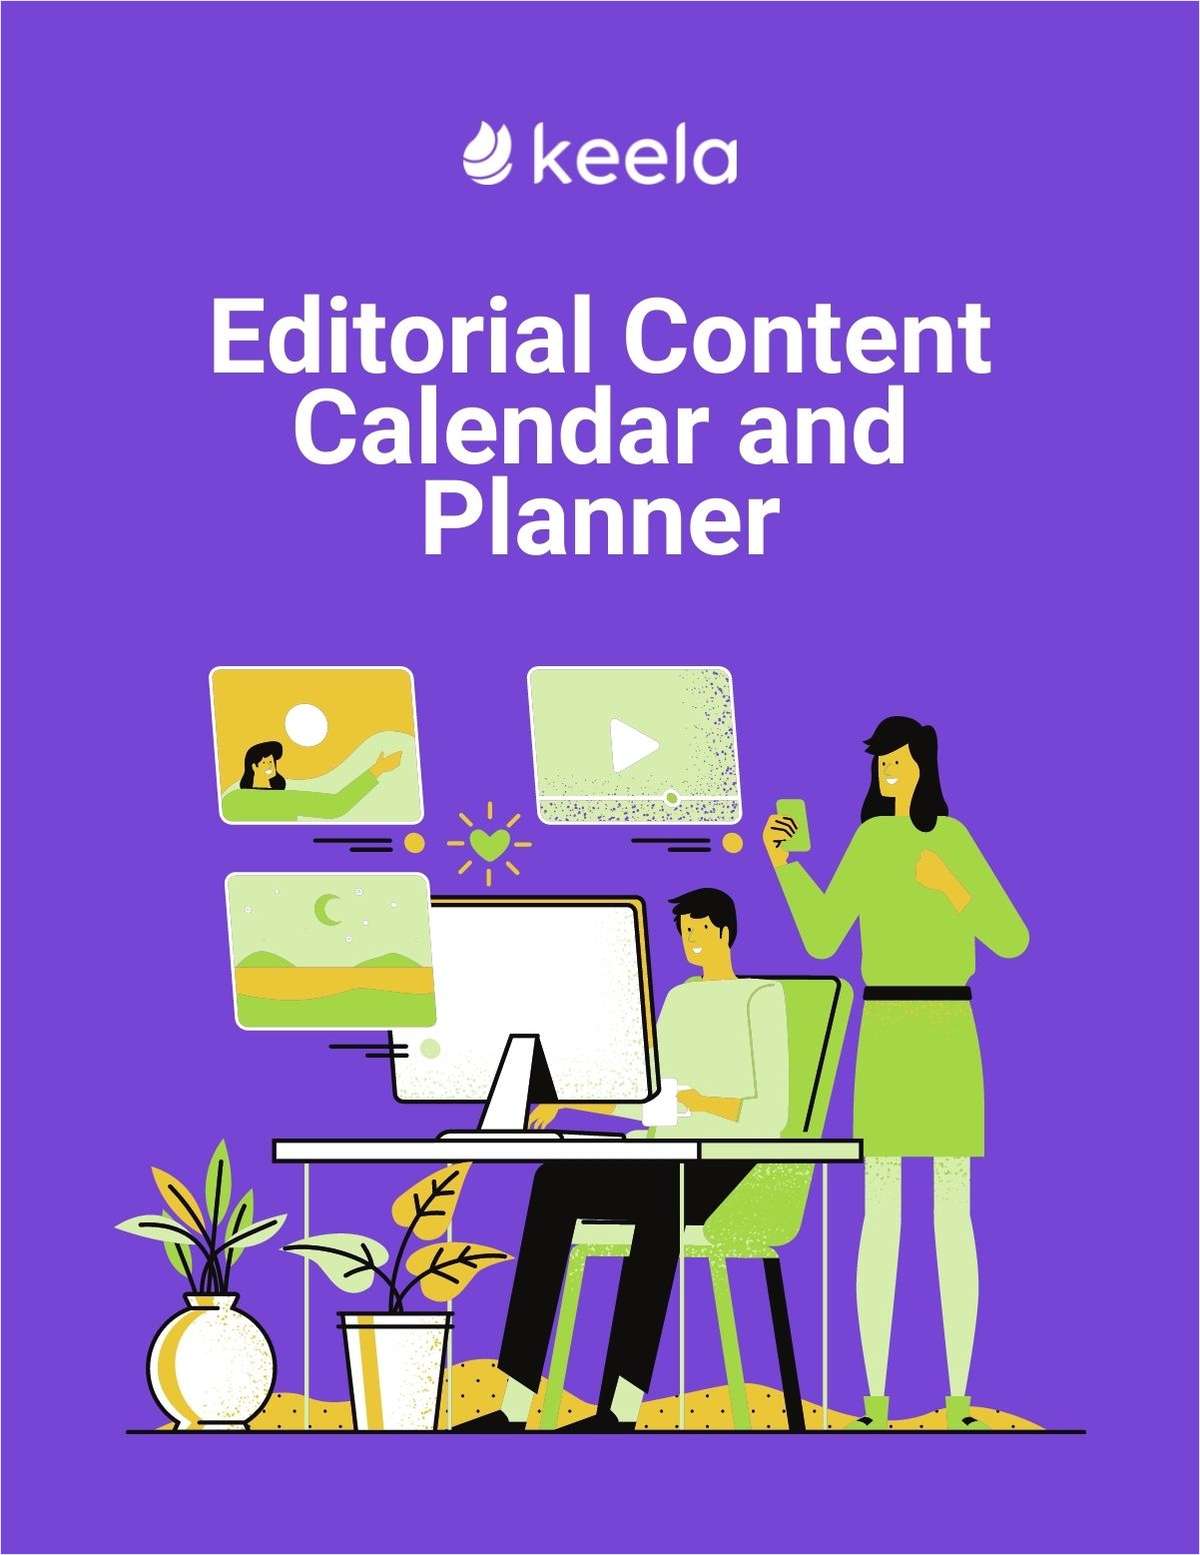 Content Calendar and Planner